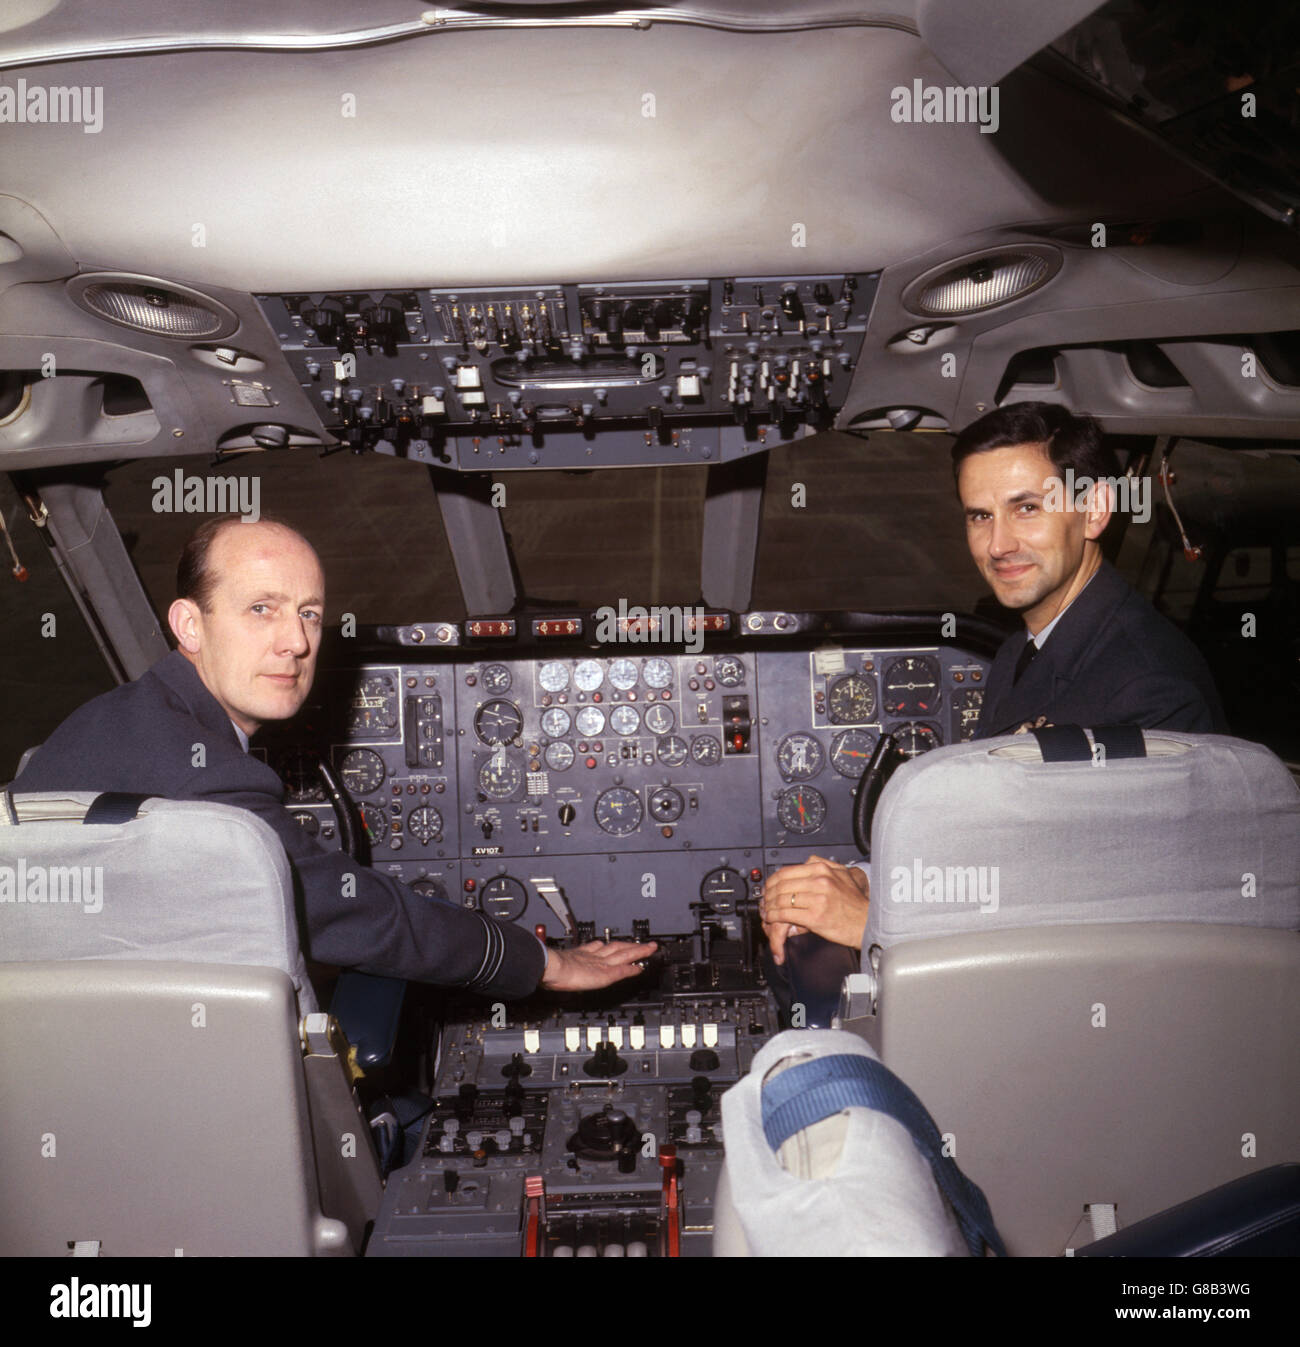 Squadron Leaders A. C. Musgrave of Hull, the Captain, and A. J. Richards of Gravesend (r), co-pilot, on the flight deck of the VC 10 of the RAF Air Support Command, which flew there Queen to her South American State visit. Stock Photo